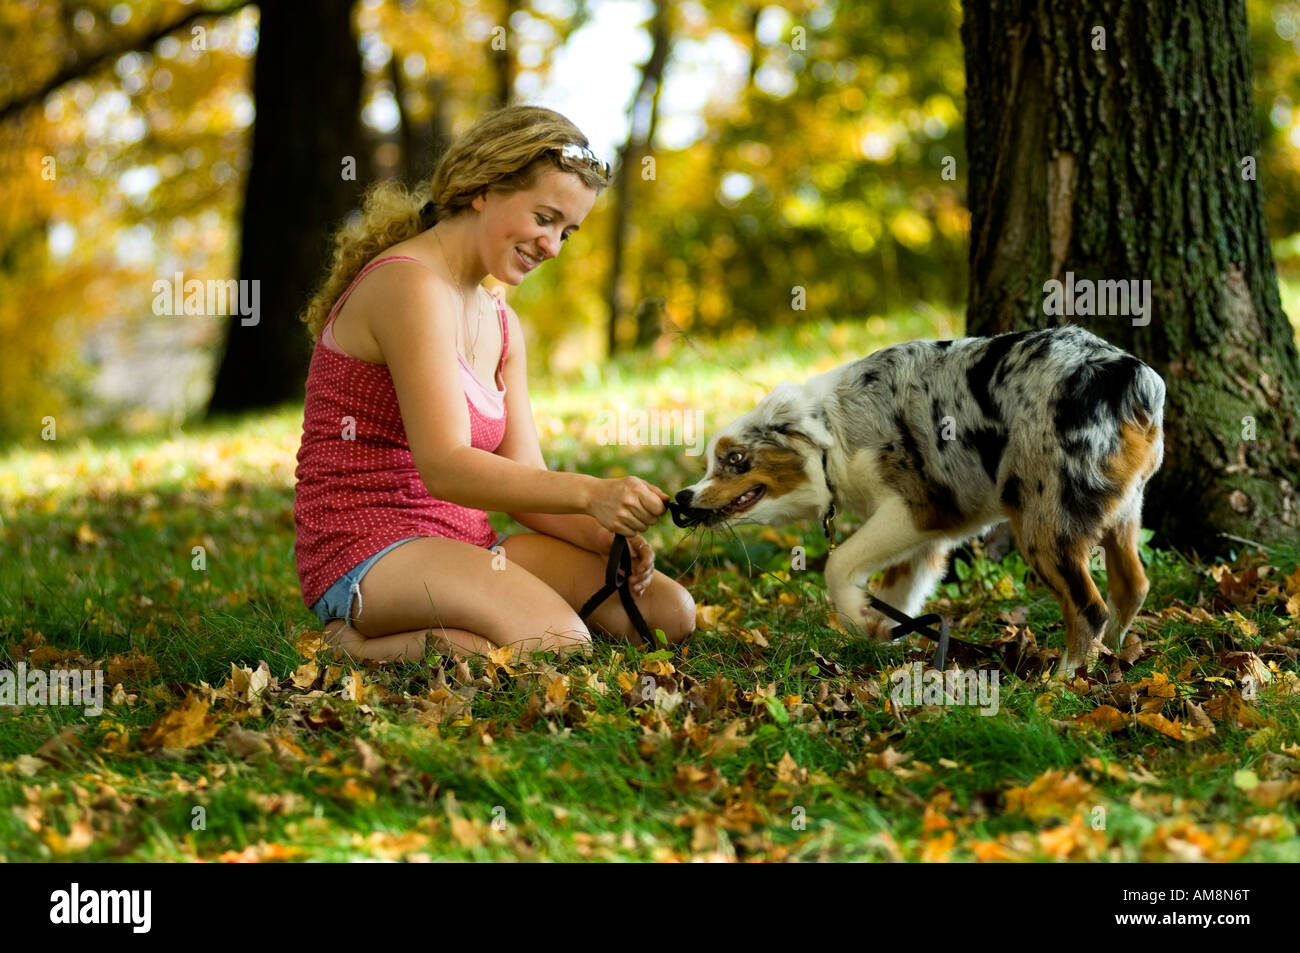 A young girl playing with her dog in the park Stock Photo